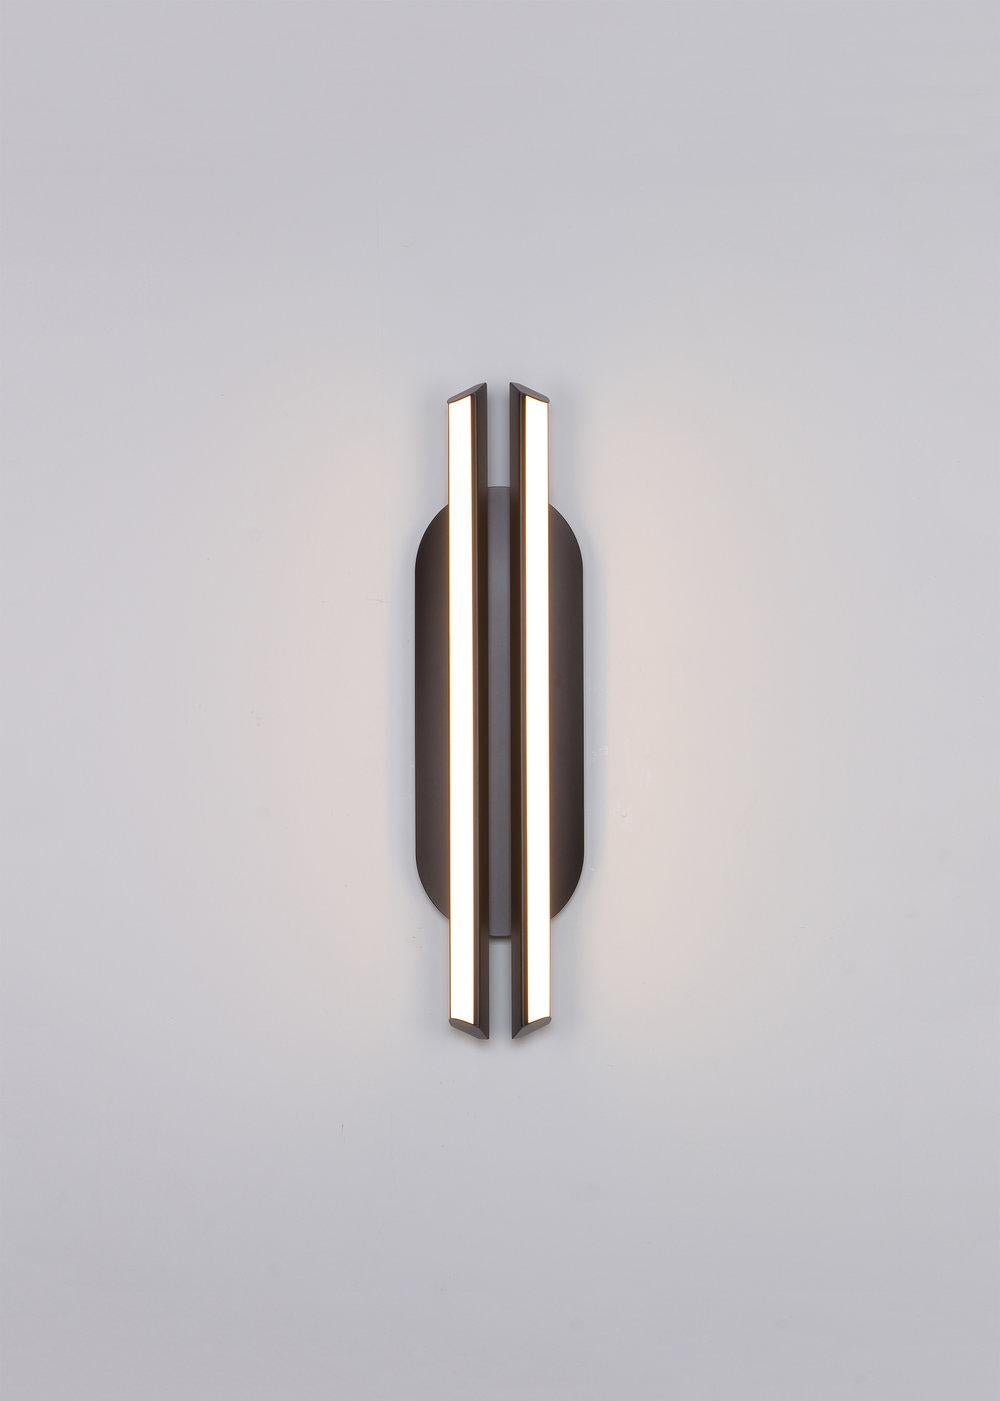 CHIME CAPSULE balances two parallel bars of soft light over a gently curved backplate. The CHIME series was inspired by the harmonious sound of resonating bells. CHIME CAPSULE provides ample light into a room while also washing light across a